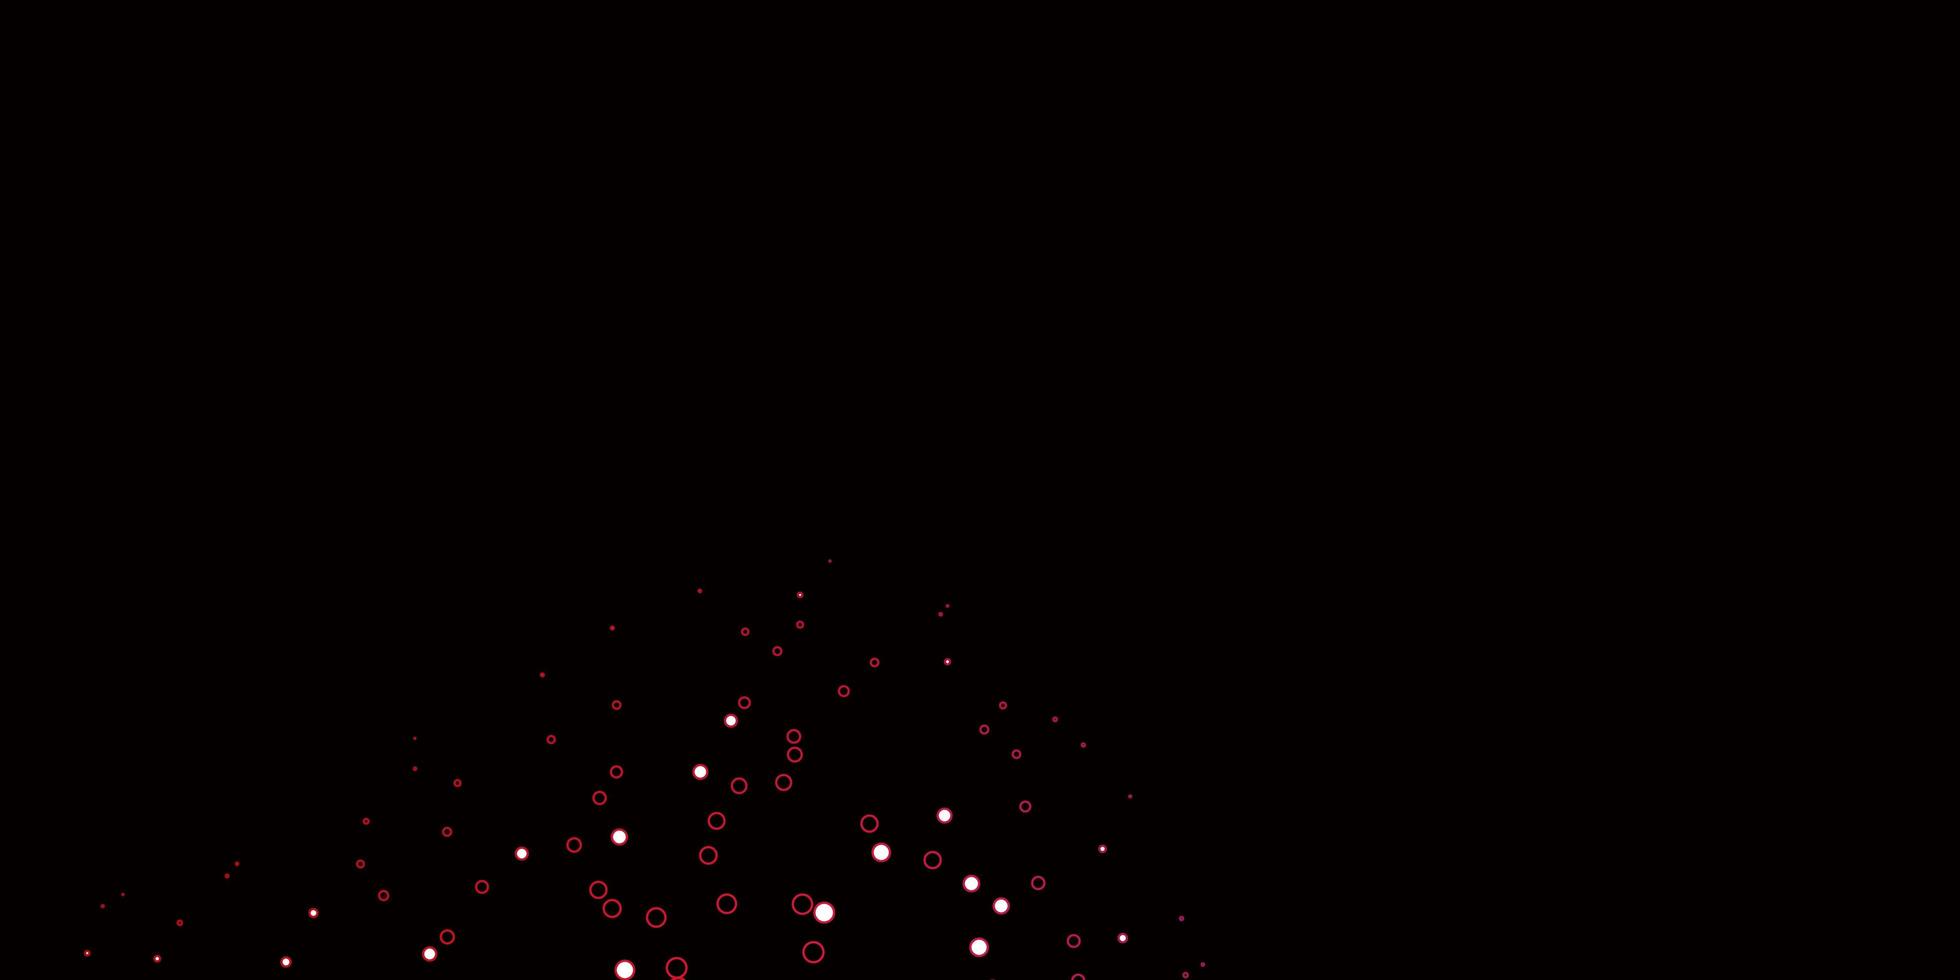 Dark Blue, Red vector texture with disks.